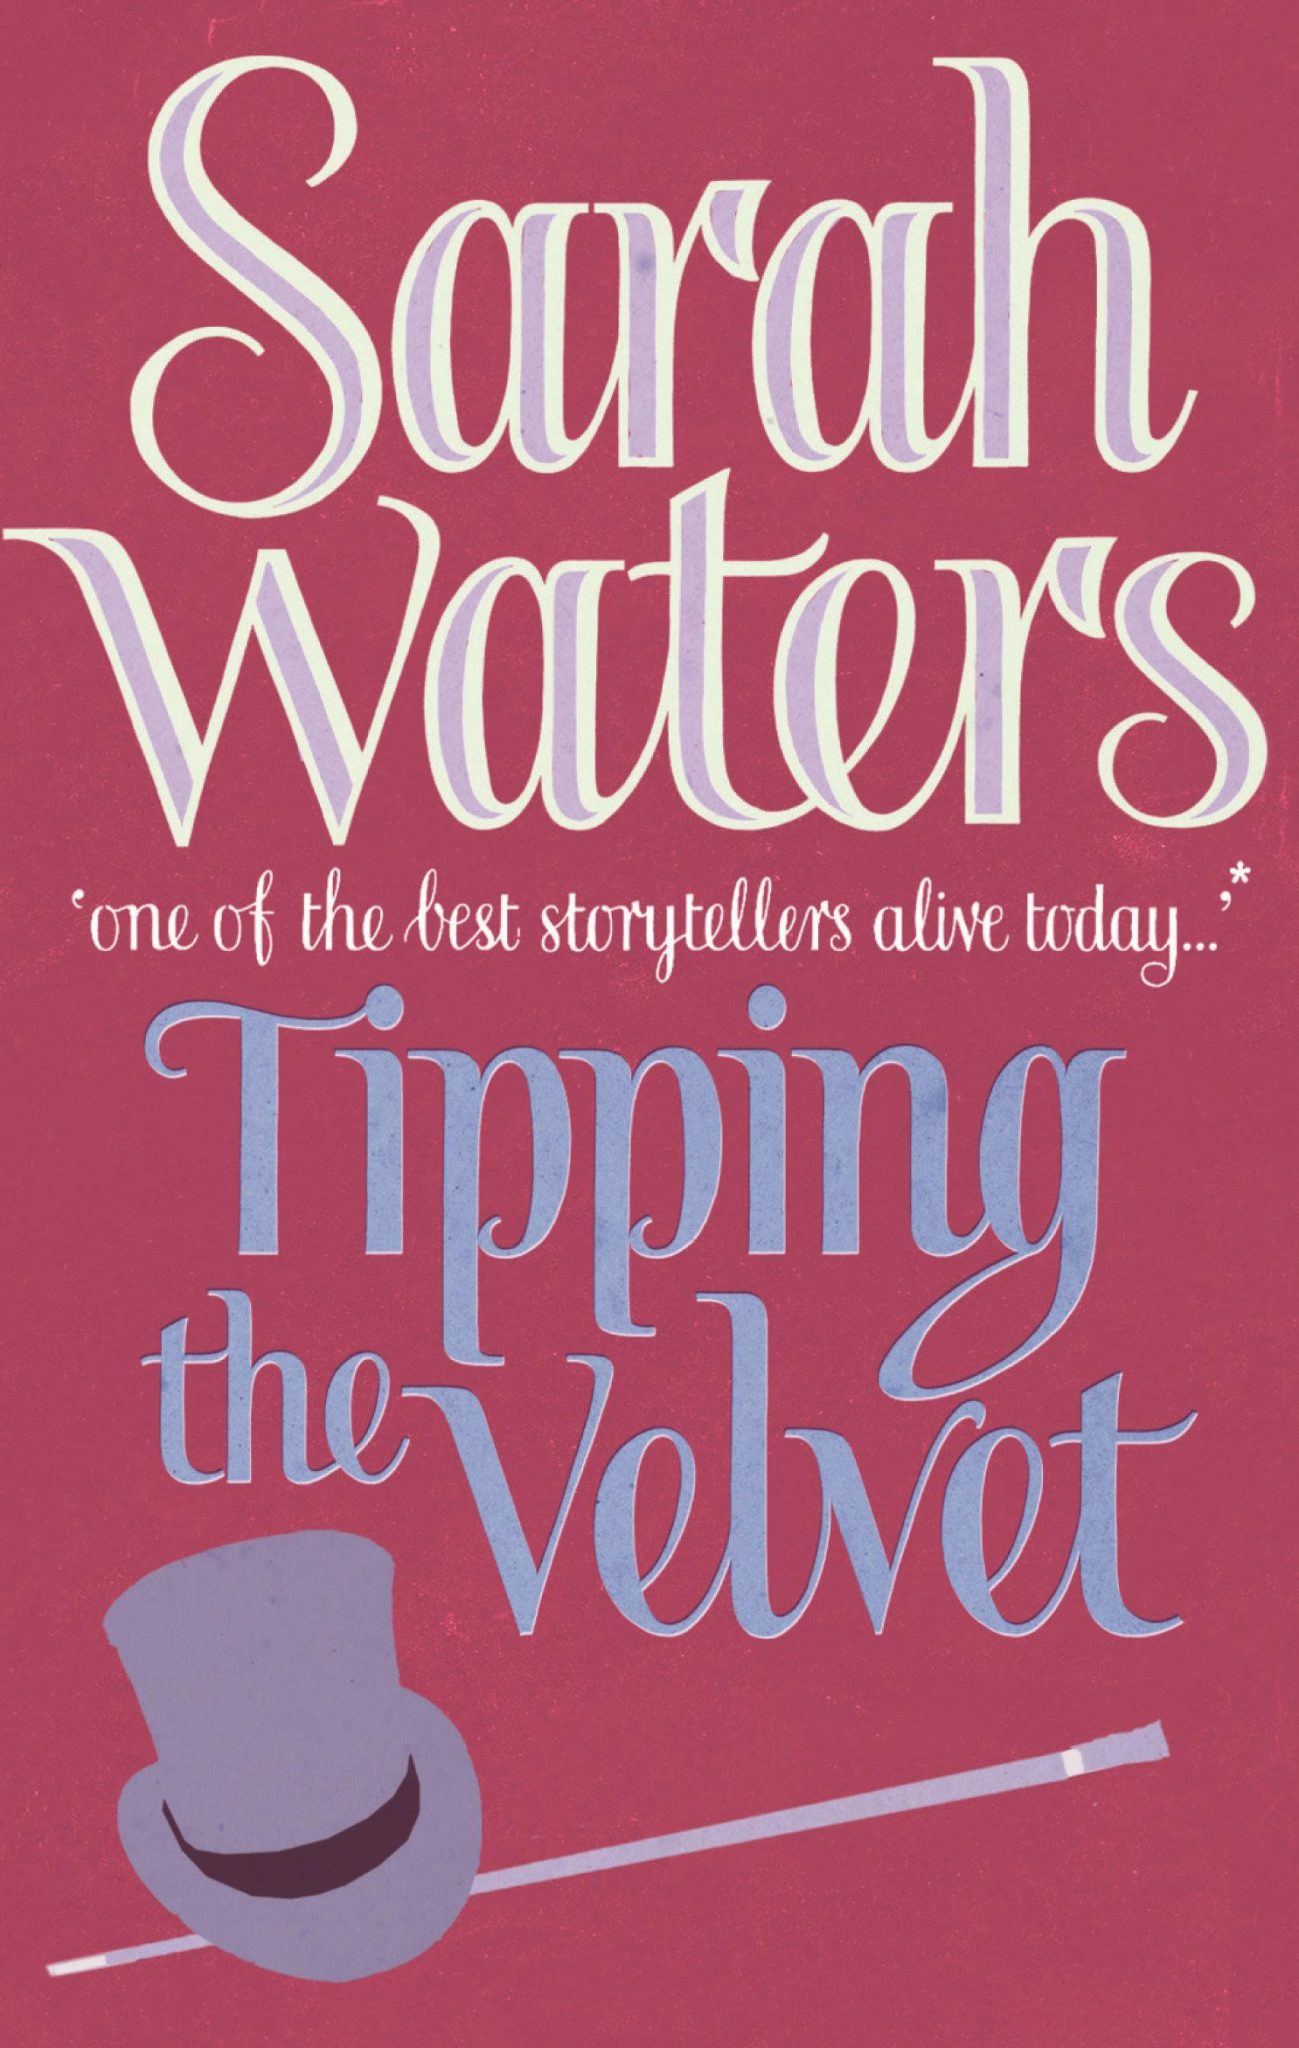 author of tipping the velvet